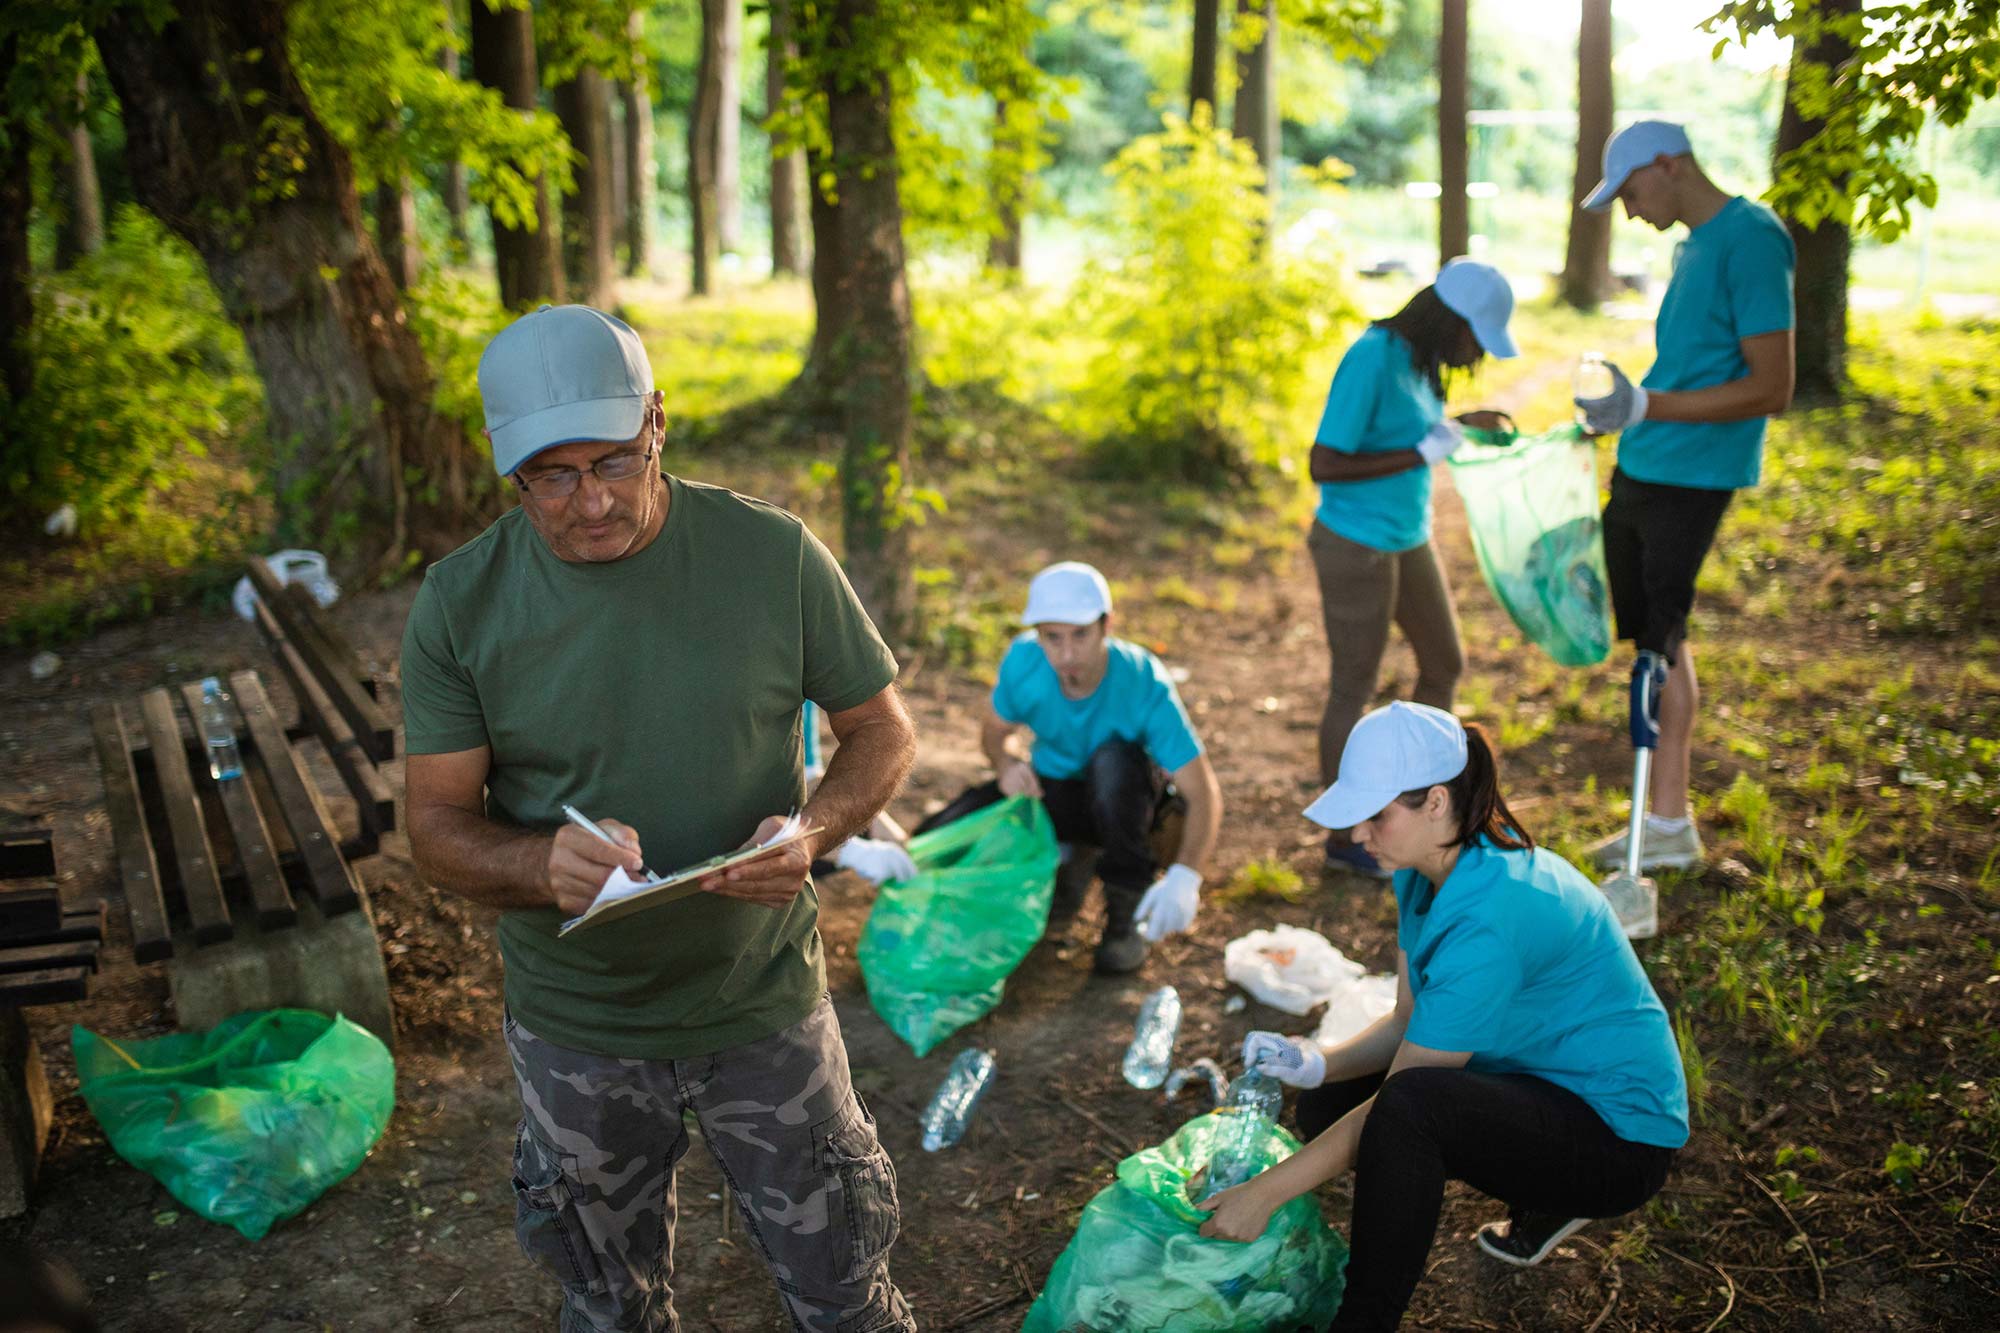 An older man marks an a clipboard as team members behind him continue to clean up trash in a park.